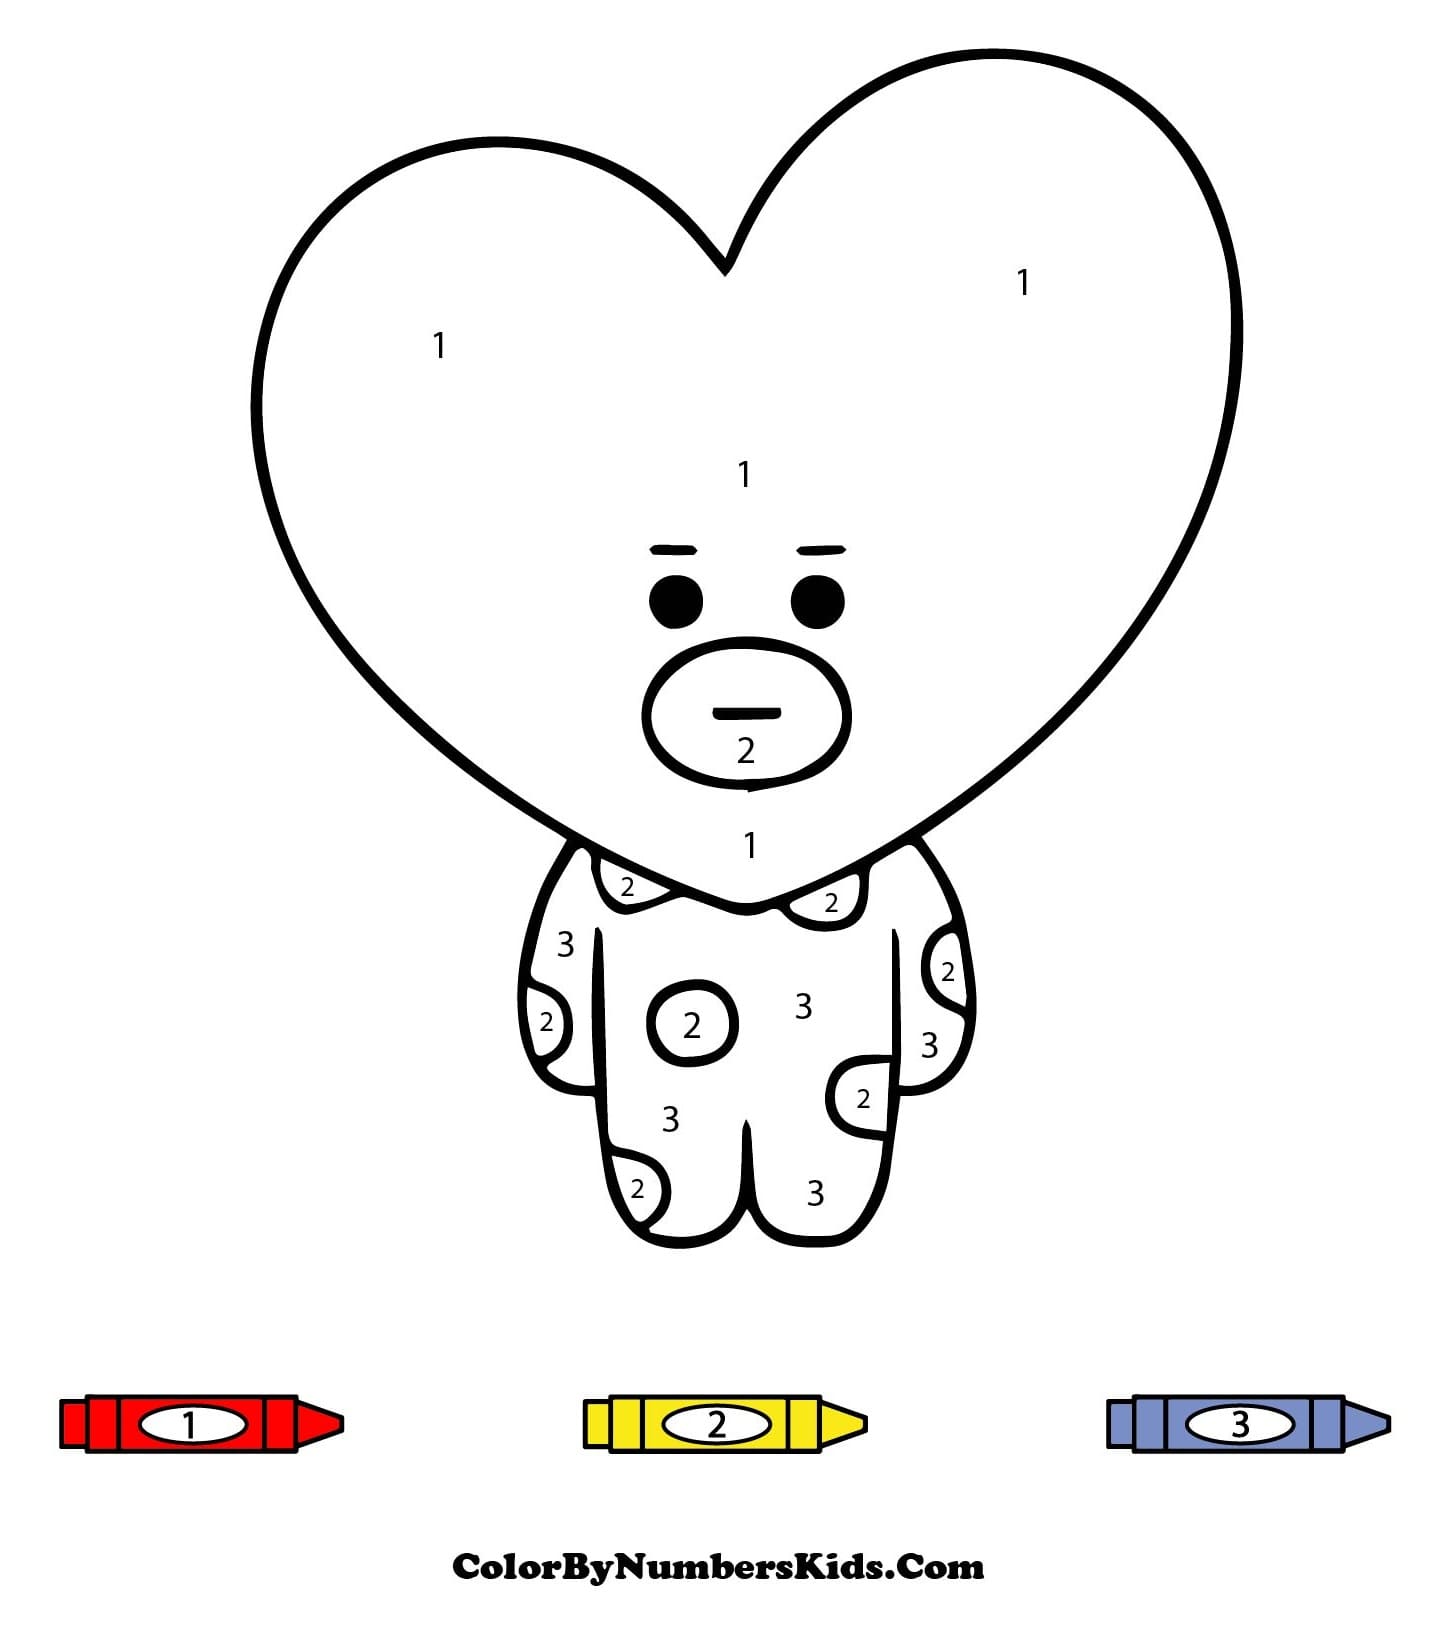 Printable BT21 Color By Number